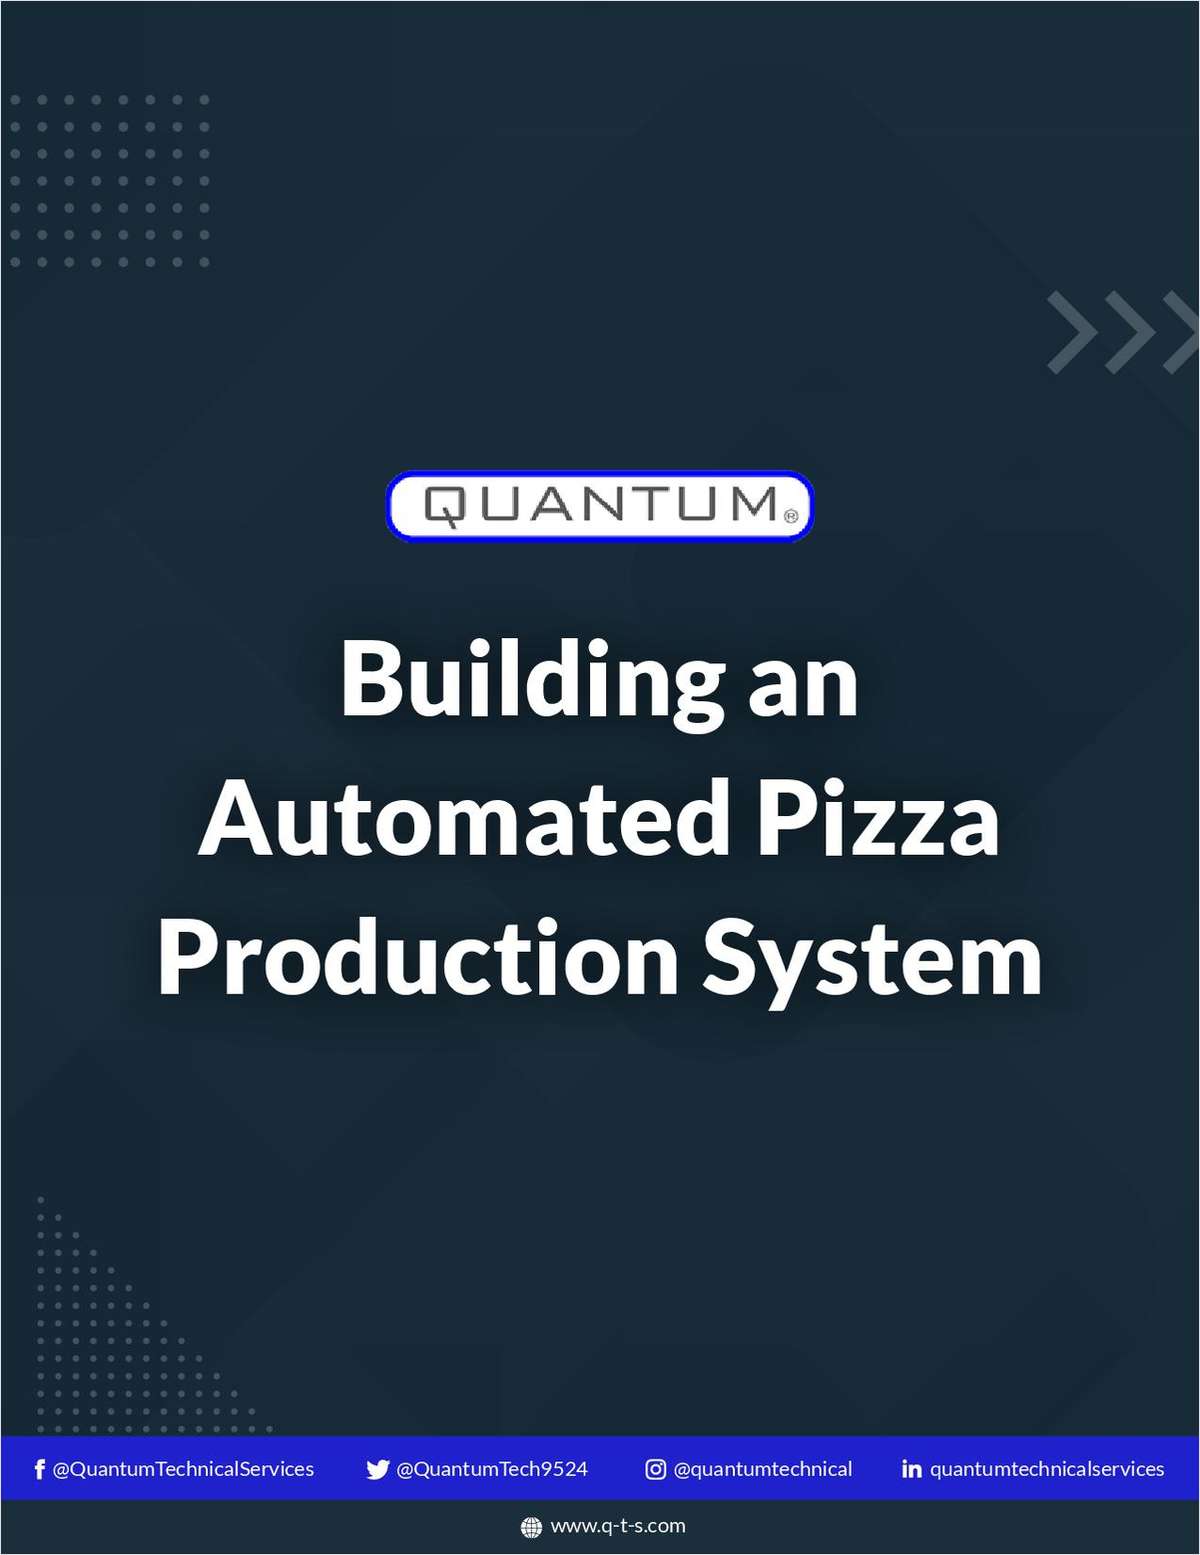 How to Build a Fully Automated Pizza Production System